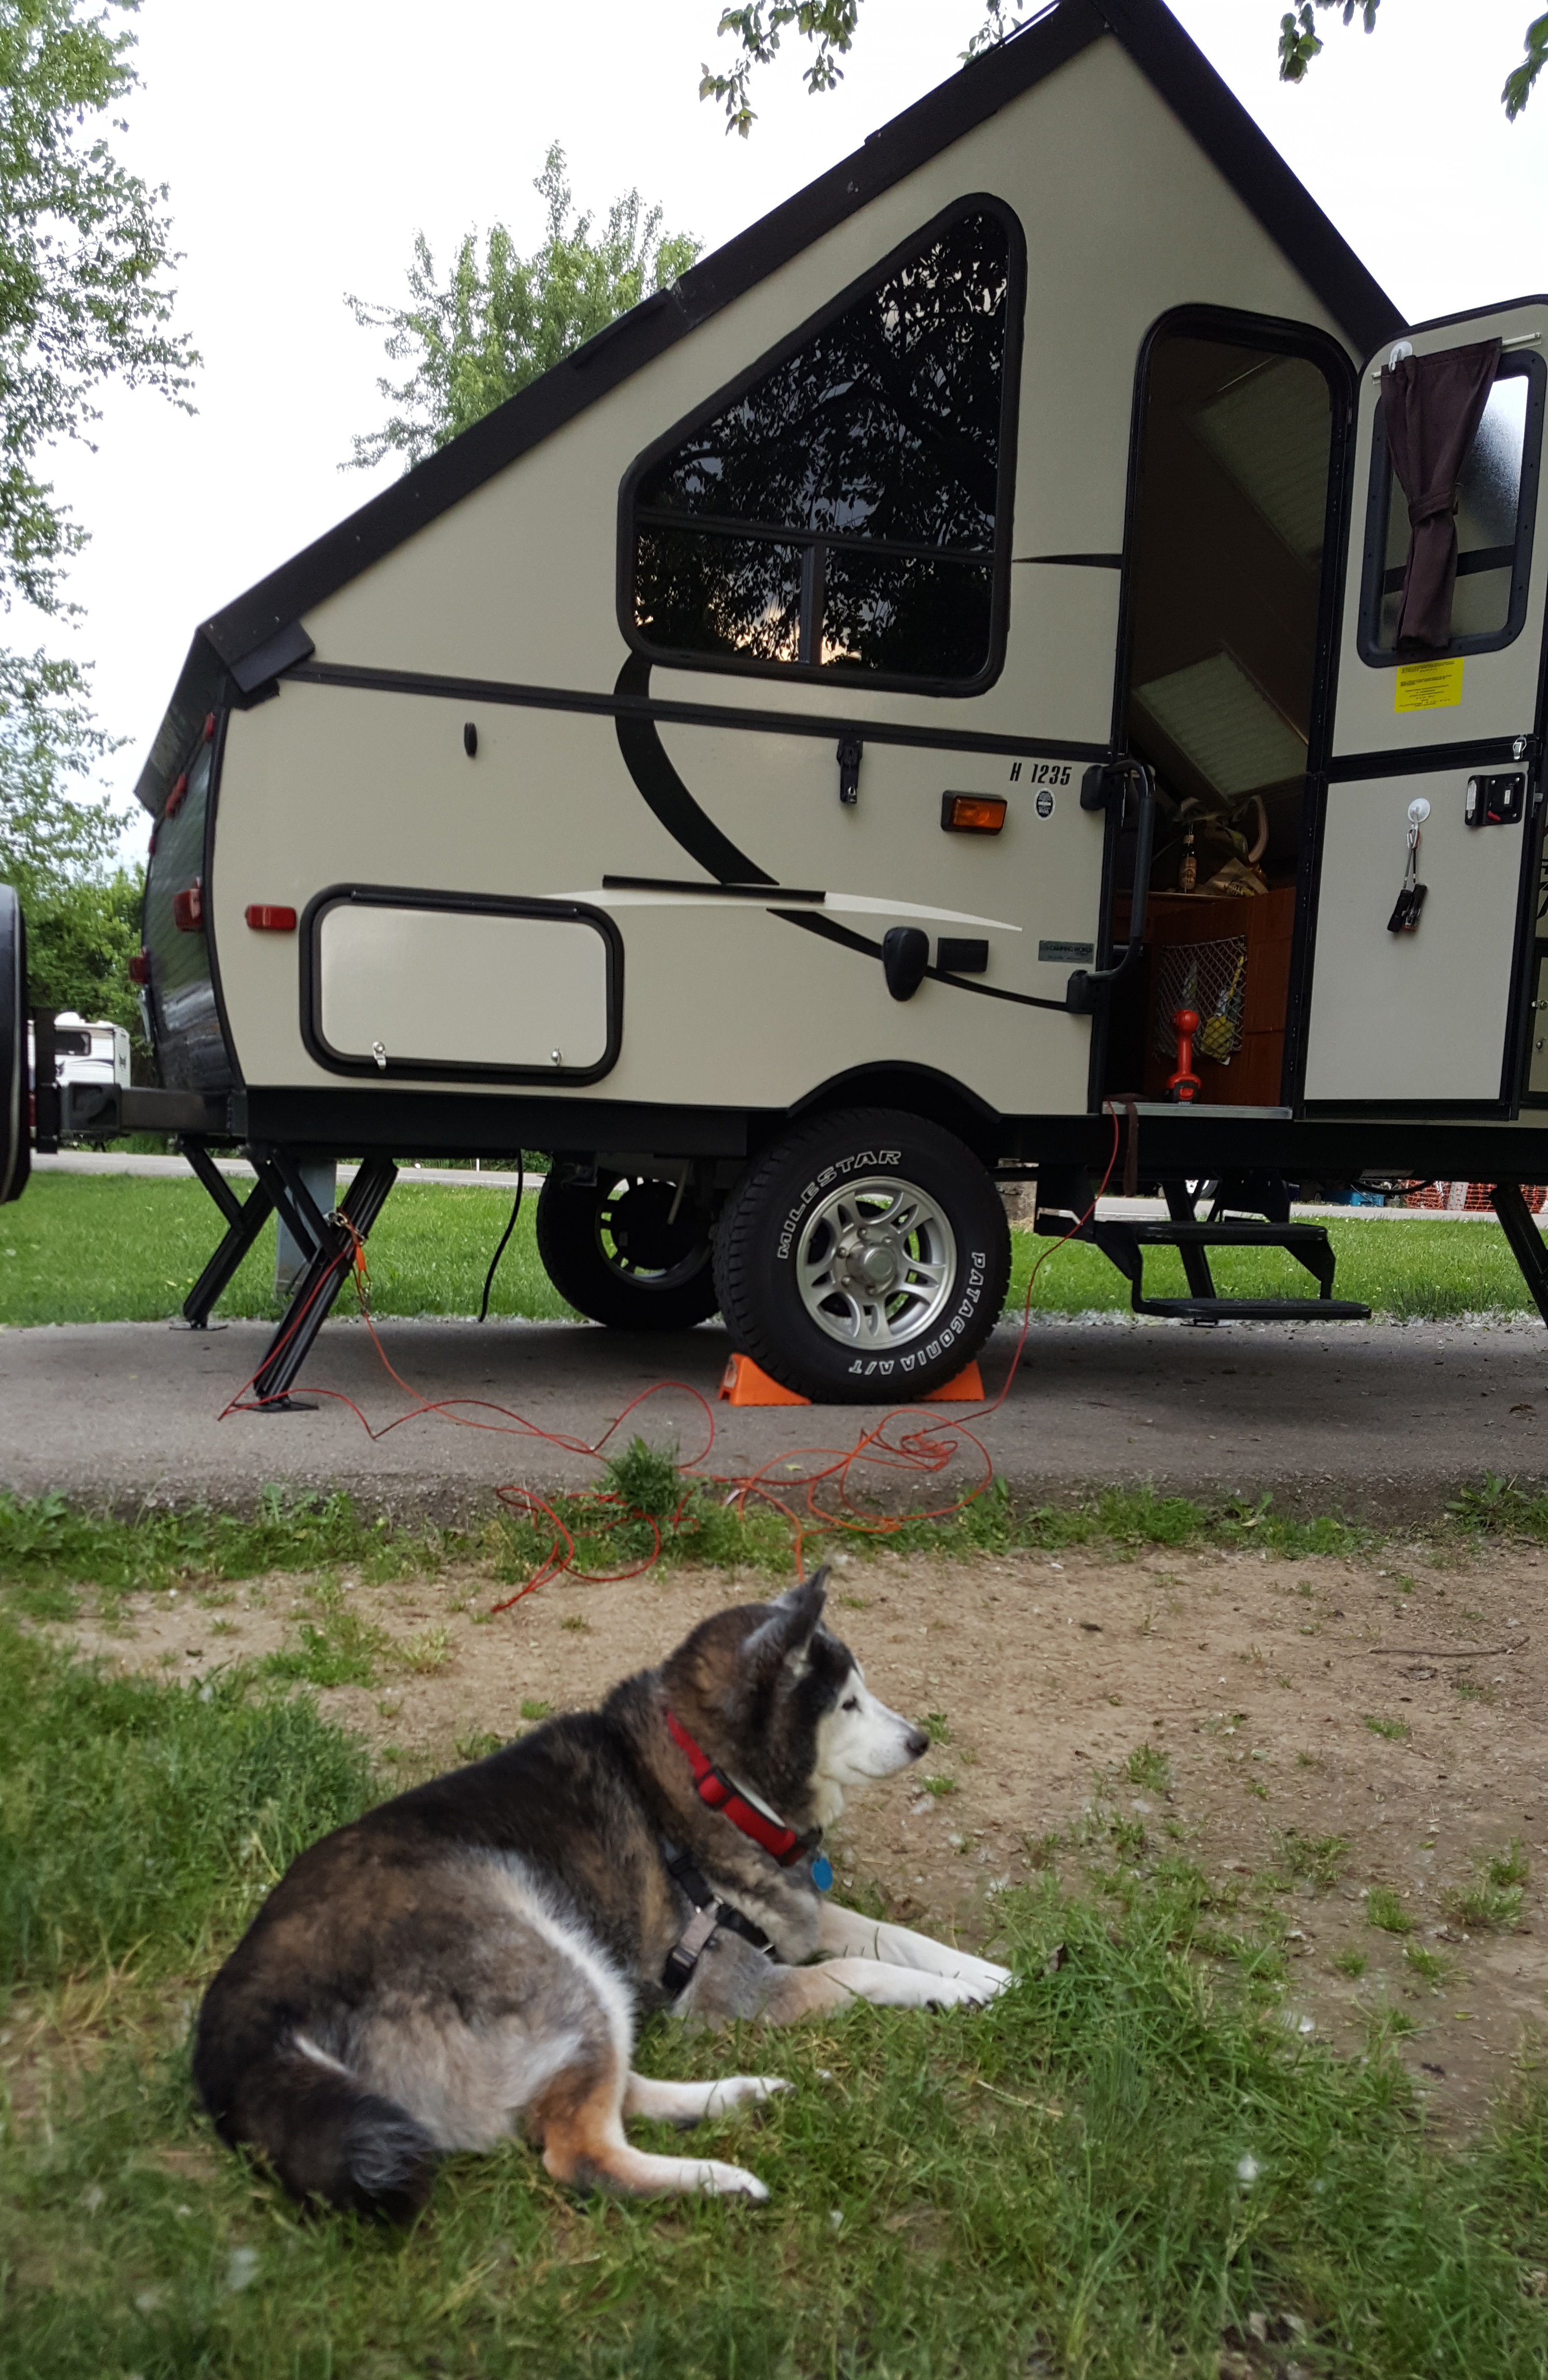 Our old dog sitting beside the a-frame camper